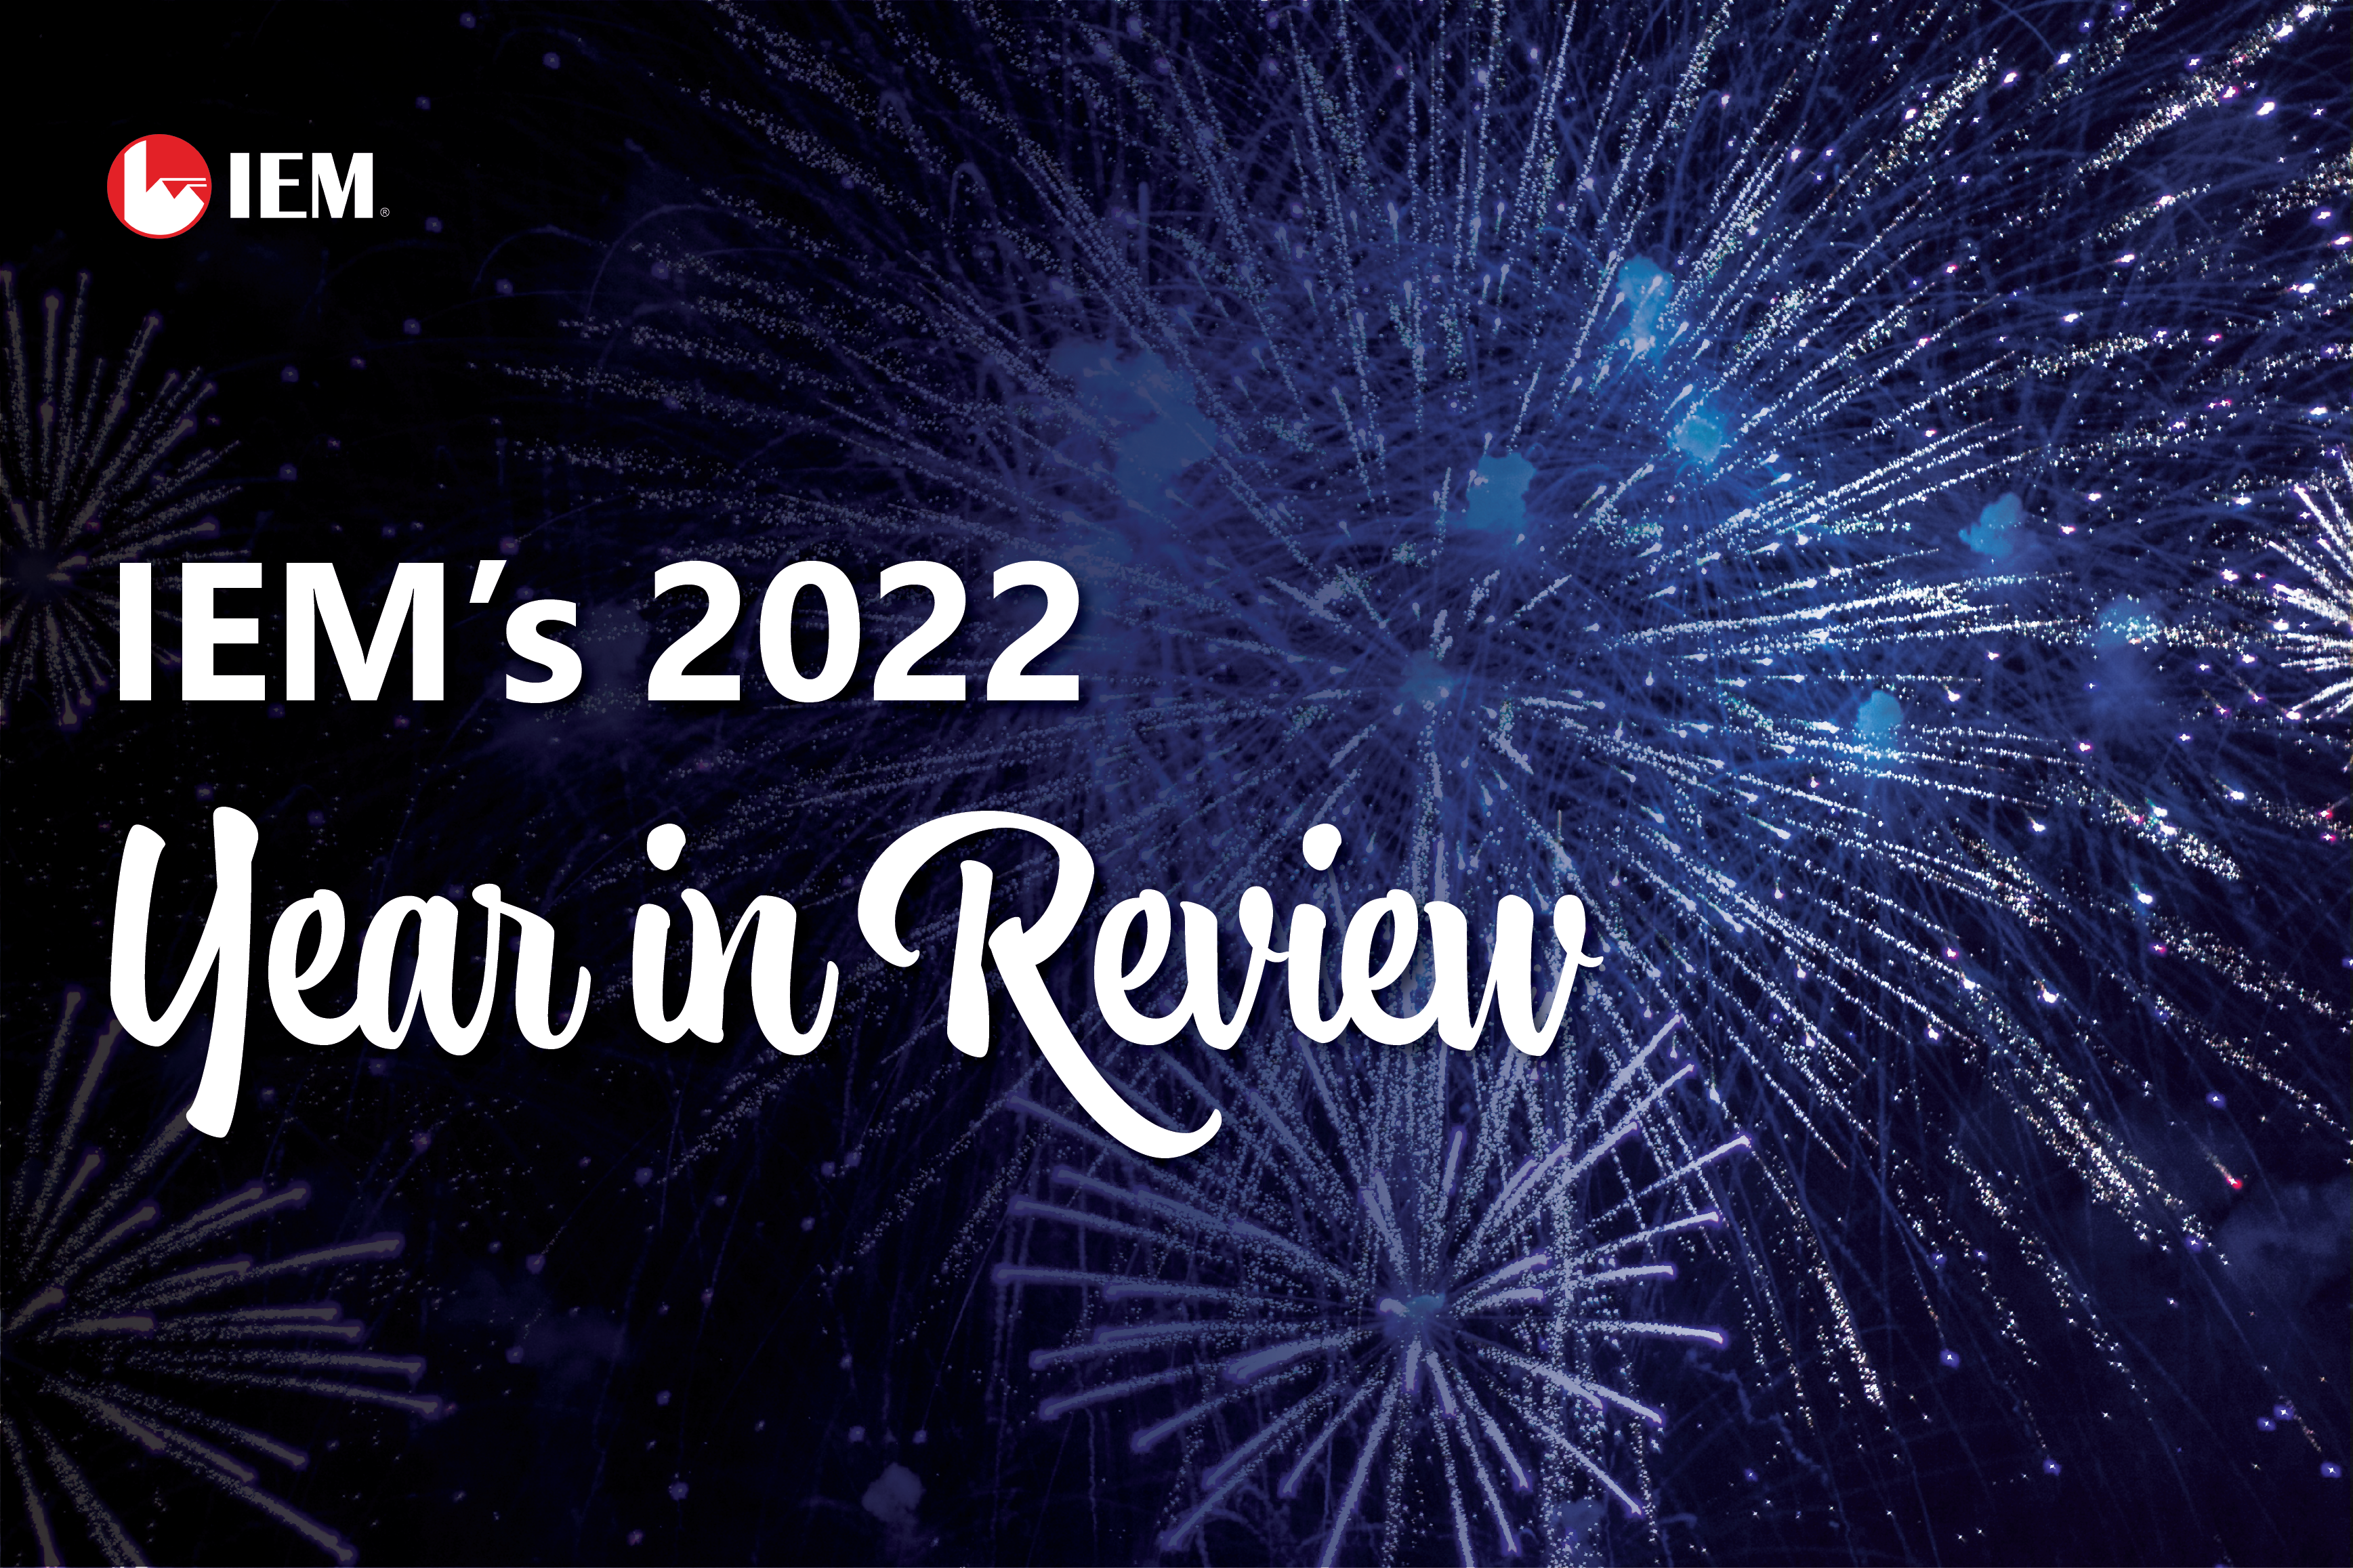 IEM’s 2022 Year in Review